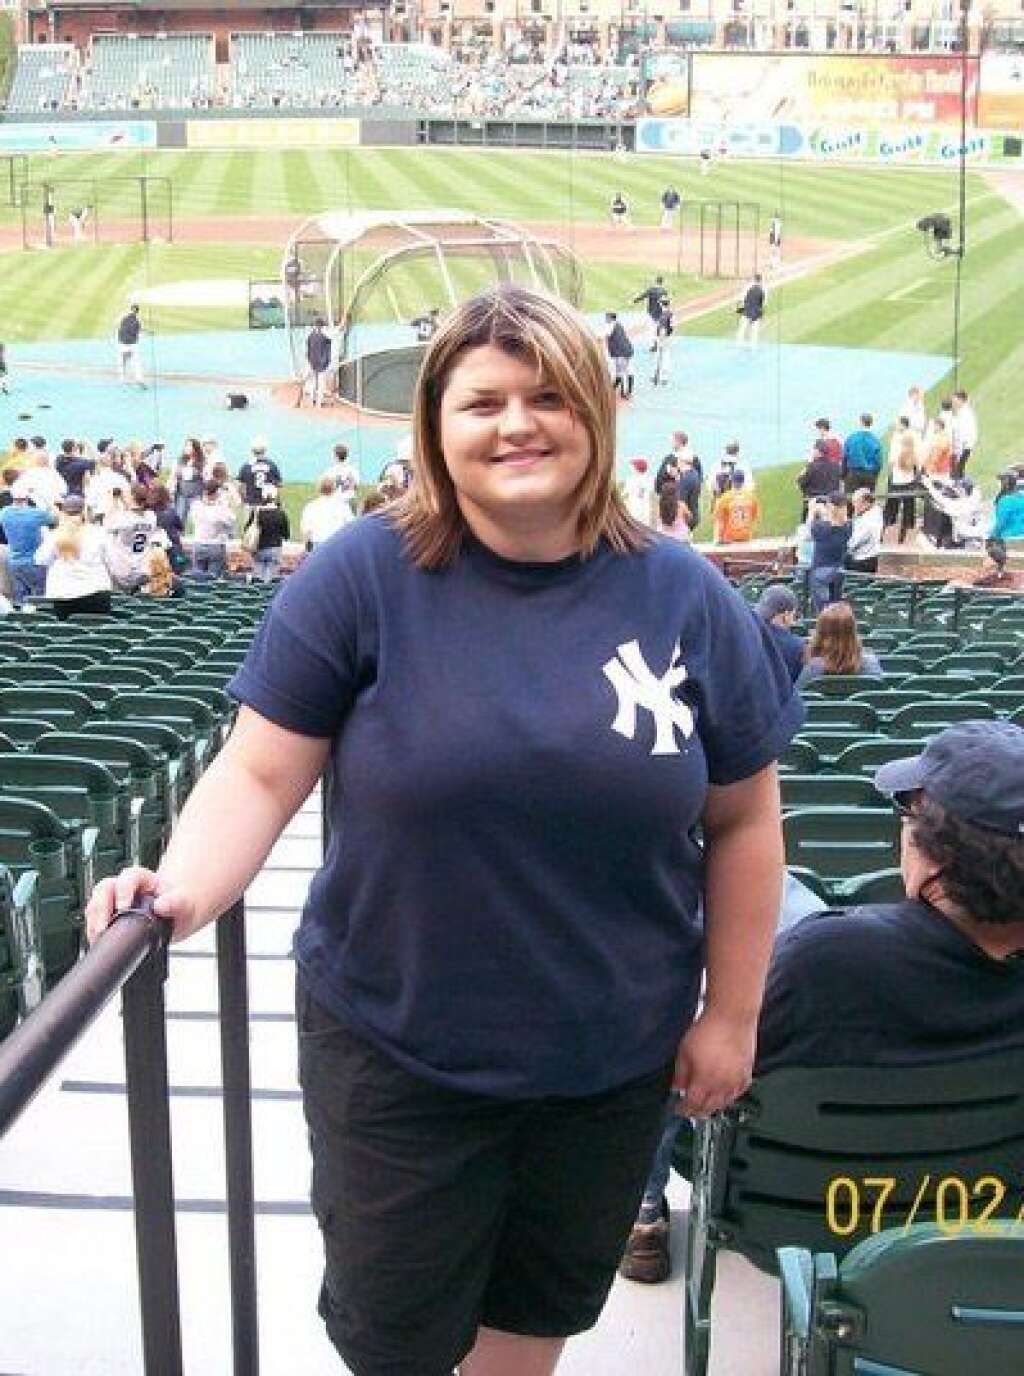 Holly BEFORE - <a href="http://www.huffingtonpost.com/2012/09/28/i-lost-weight-holly-white_n_1923280.html">Read Holly's story here.</a>